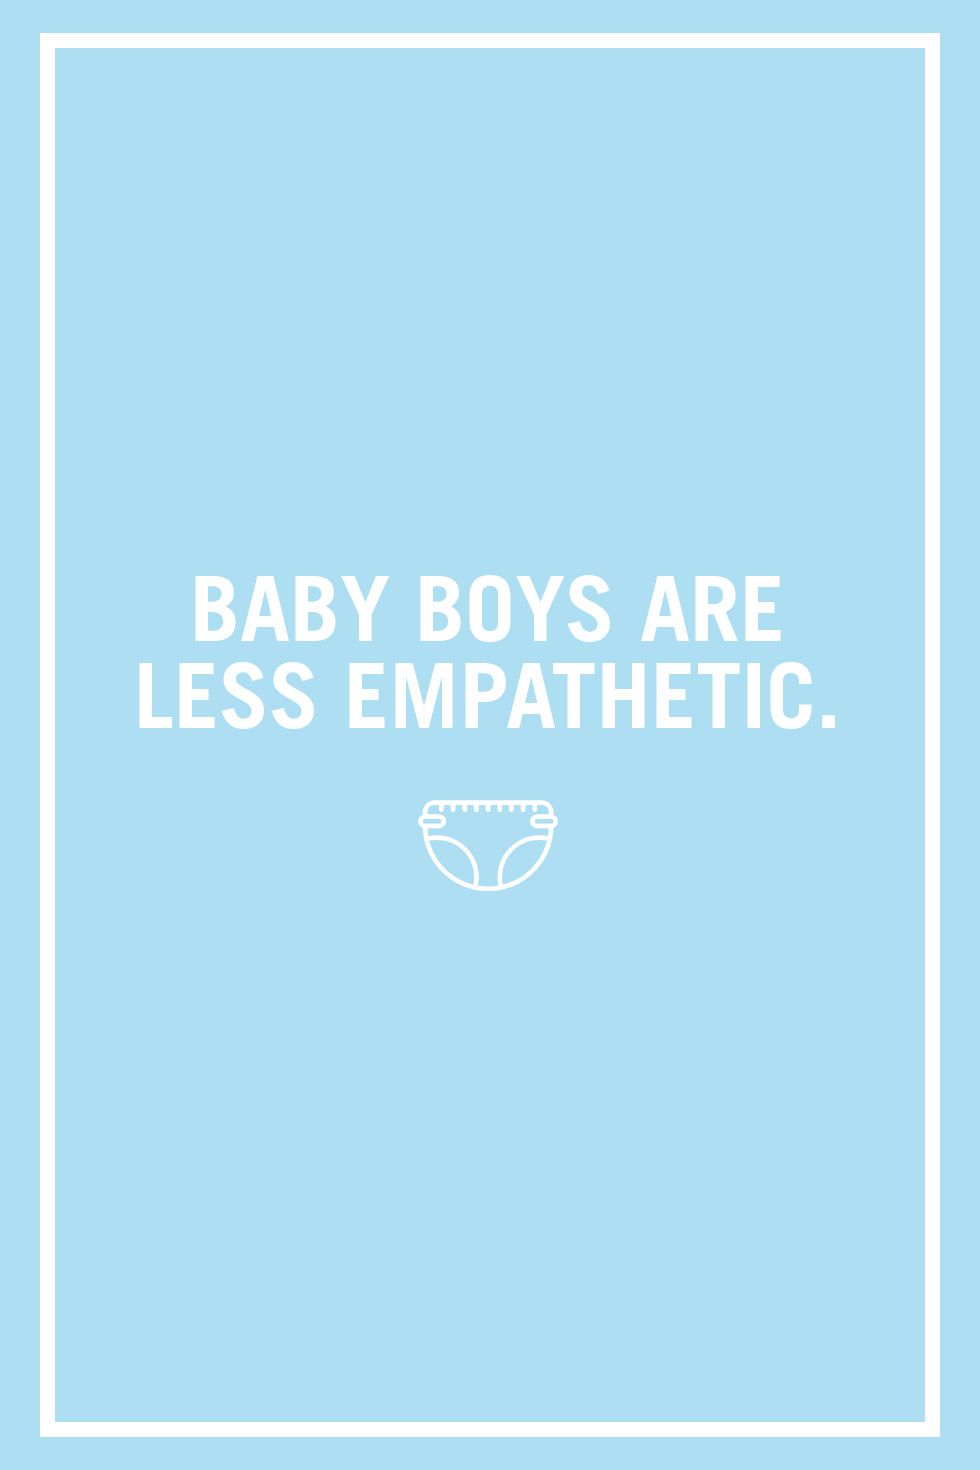 <p>No one is saying your sweet baby boy is a jerk, but boys consistently show less of an ability to recognize emotions and empathize with others than girls. These differences start at a young age and only widen as babies grow up, according to a <a href="https://www.scientificamerican.com/article/girl-brain-boy-brain/">review published in the <i data-redactor-tag="i">Scientific American</i></a>. The good news? The difference in babies is small and by modeling empathy you can teach your son to be more in tune with others.
</p>